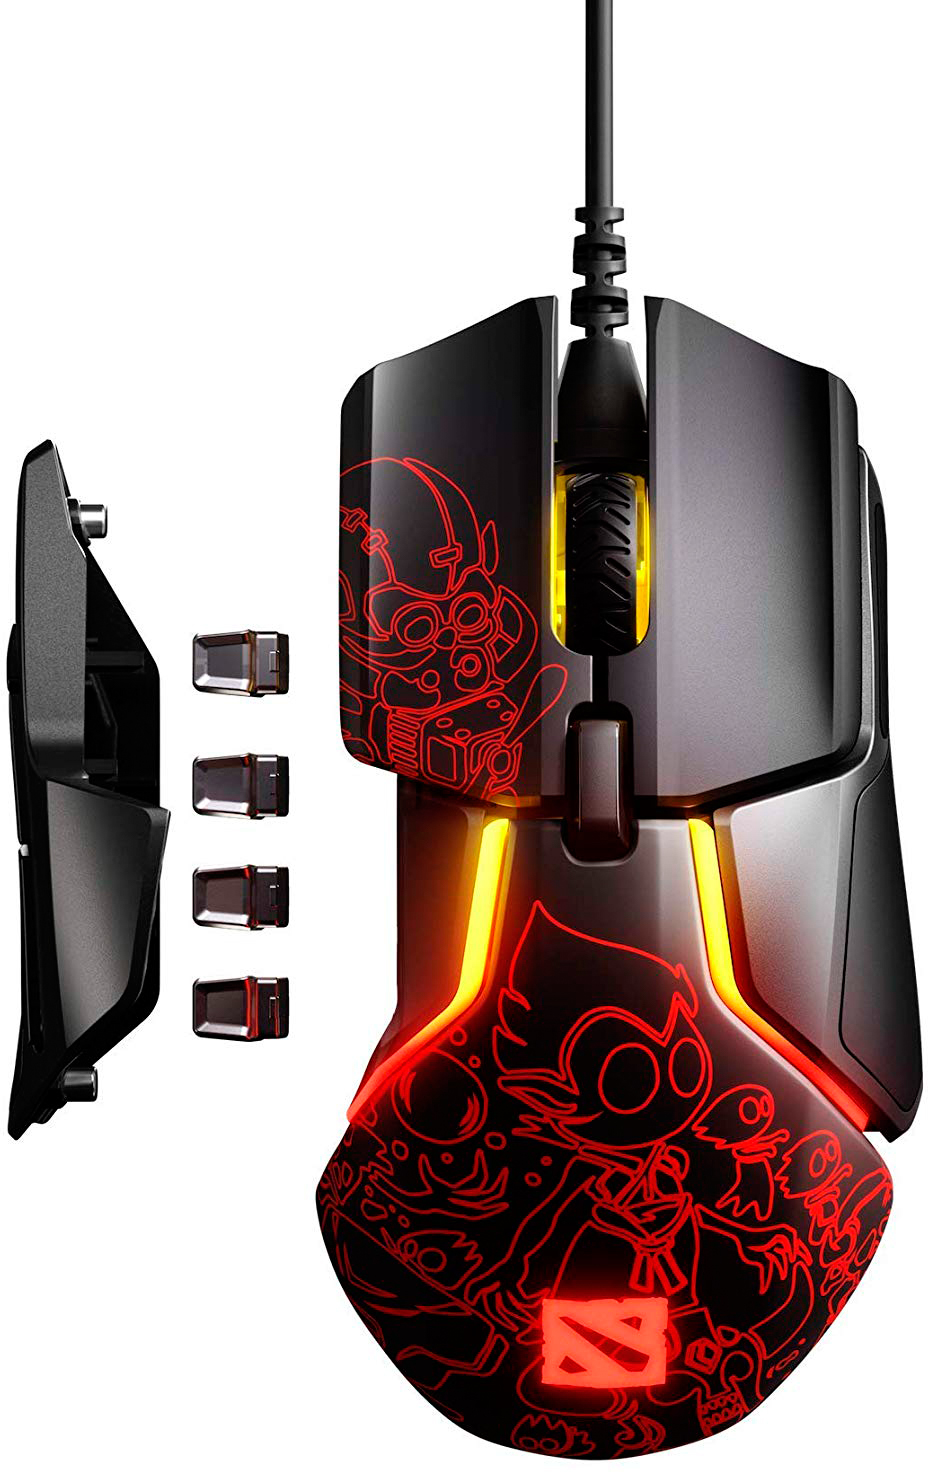 Steelseries rival dota edition фото 21